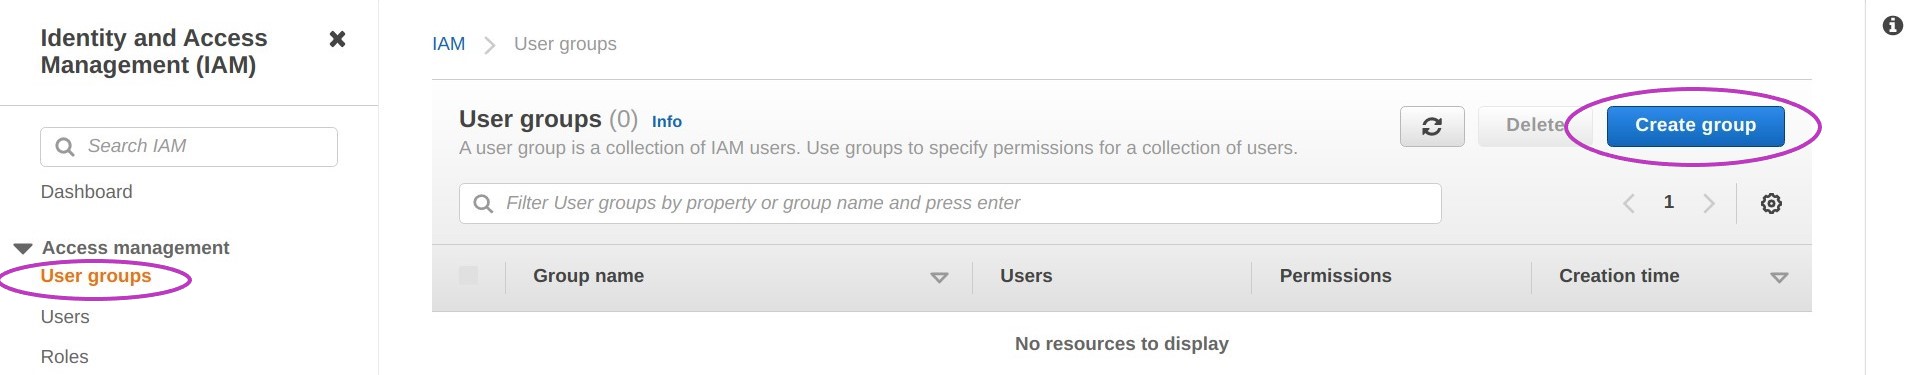 Screen shot of AWS Console IAM User Groups page in a browser with the option "User groups" and the botton "Create group" circled